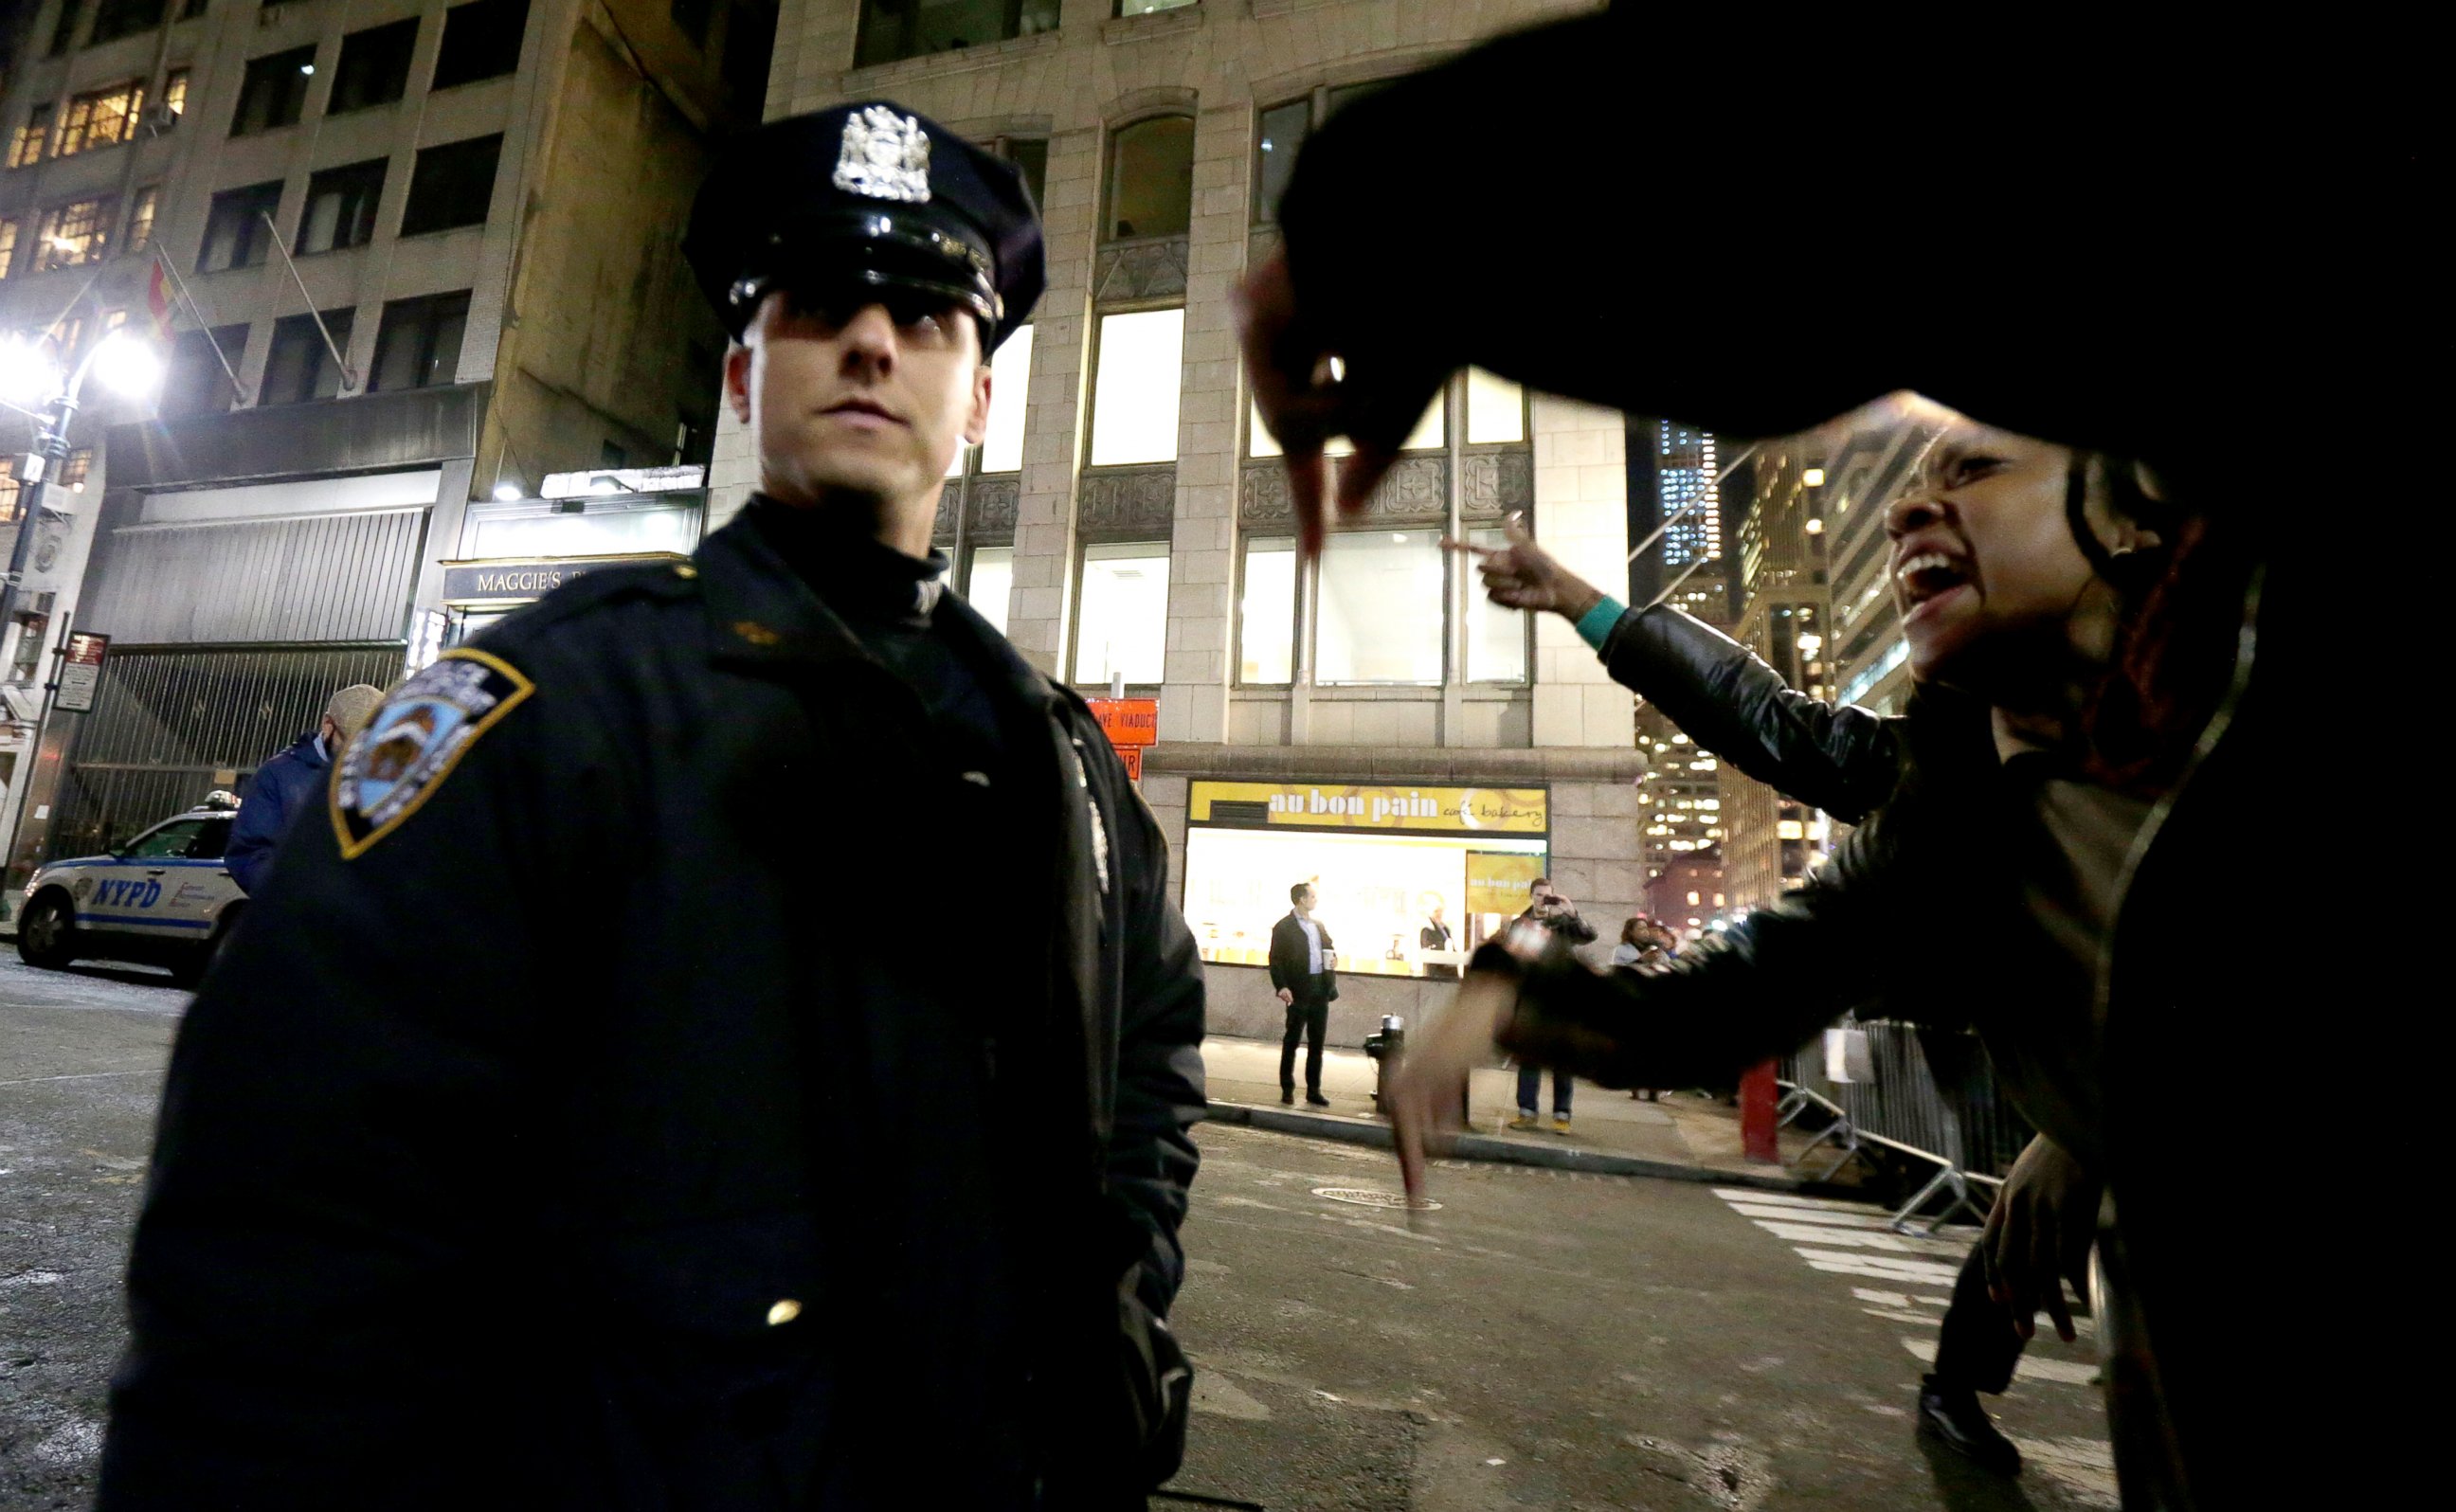 PHOTO: A woman yells at a New York City Police officer during a protest after it was announced that the officer involved in the death of Eric Garner is not being indicted, Dec. 3, 2014, in New York.